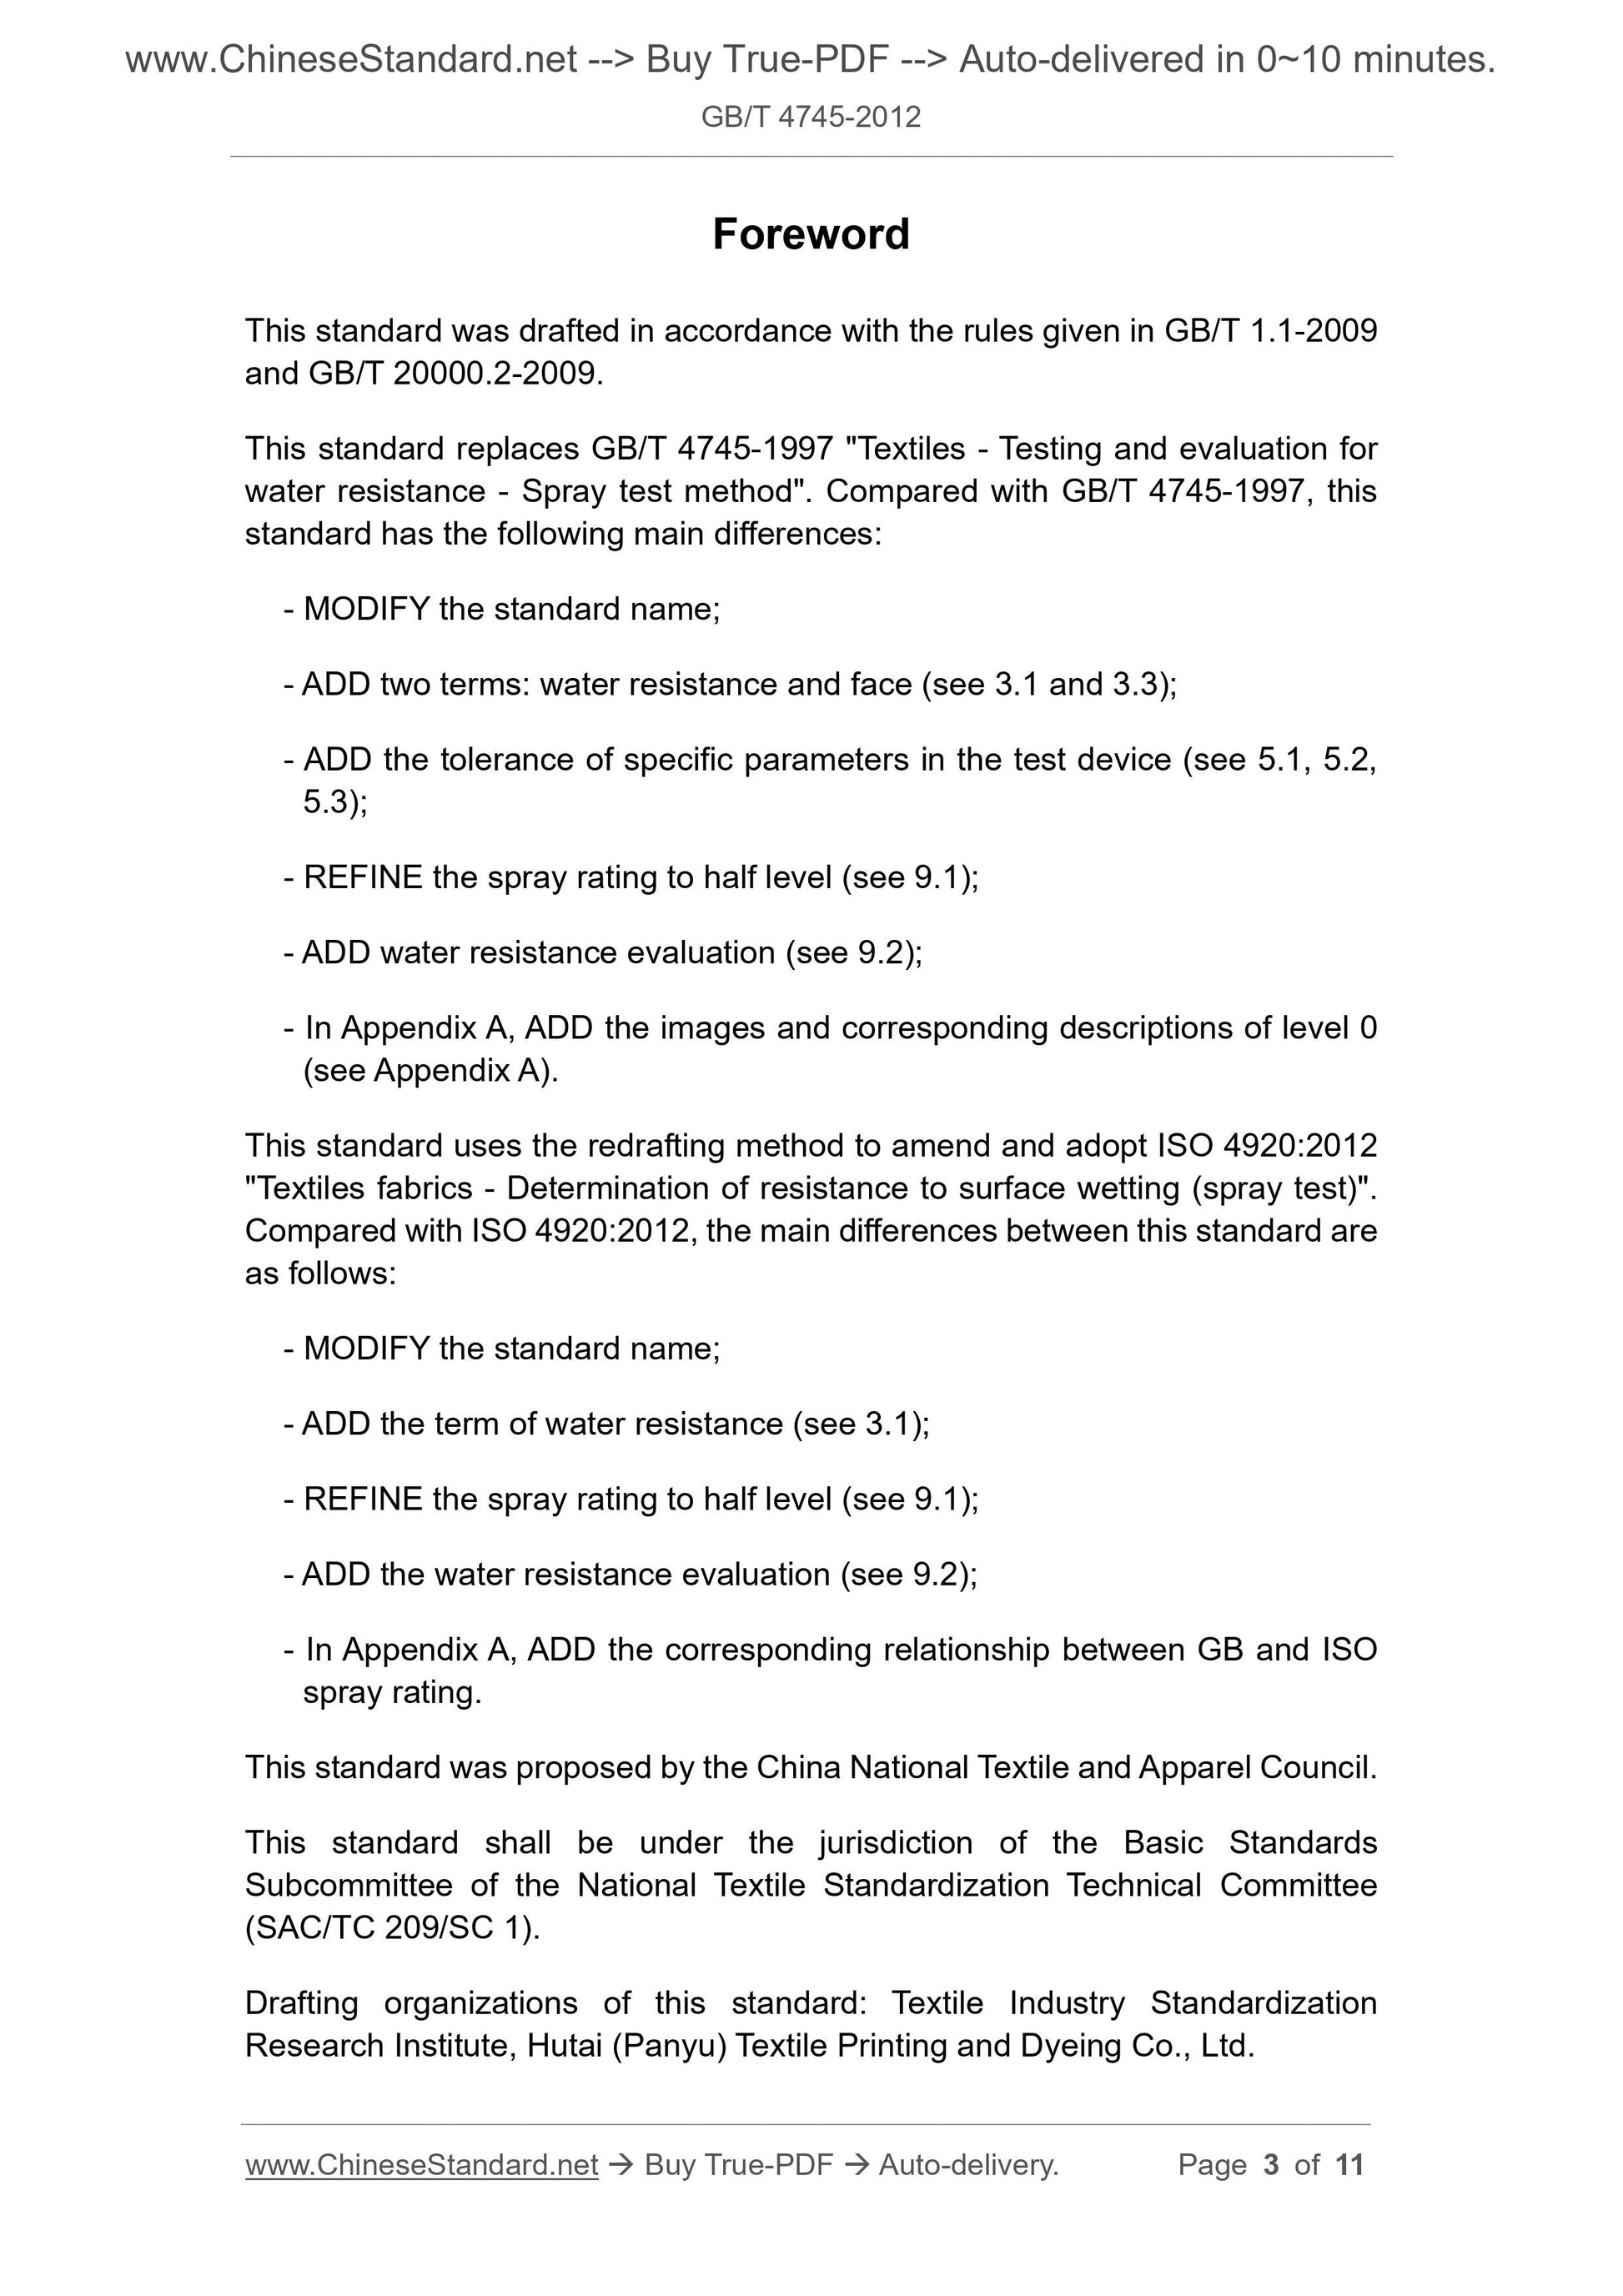 GB/T 4745-2012 Page 3